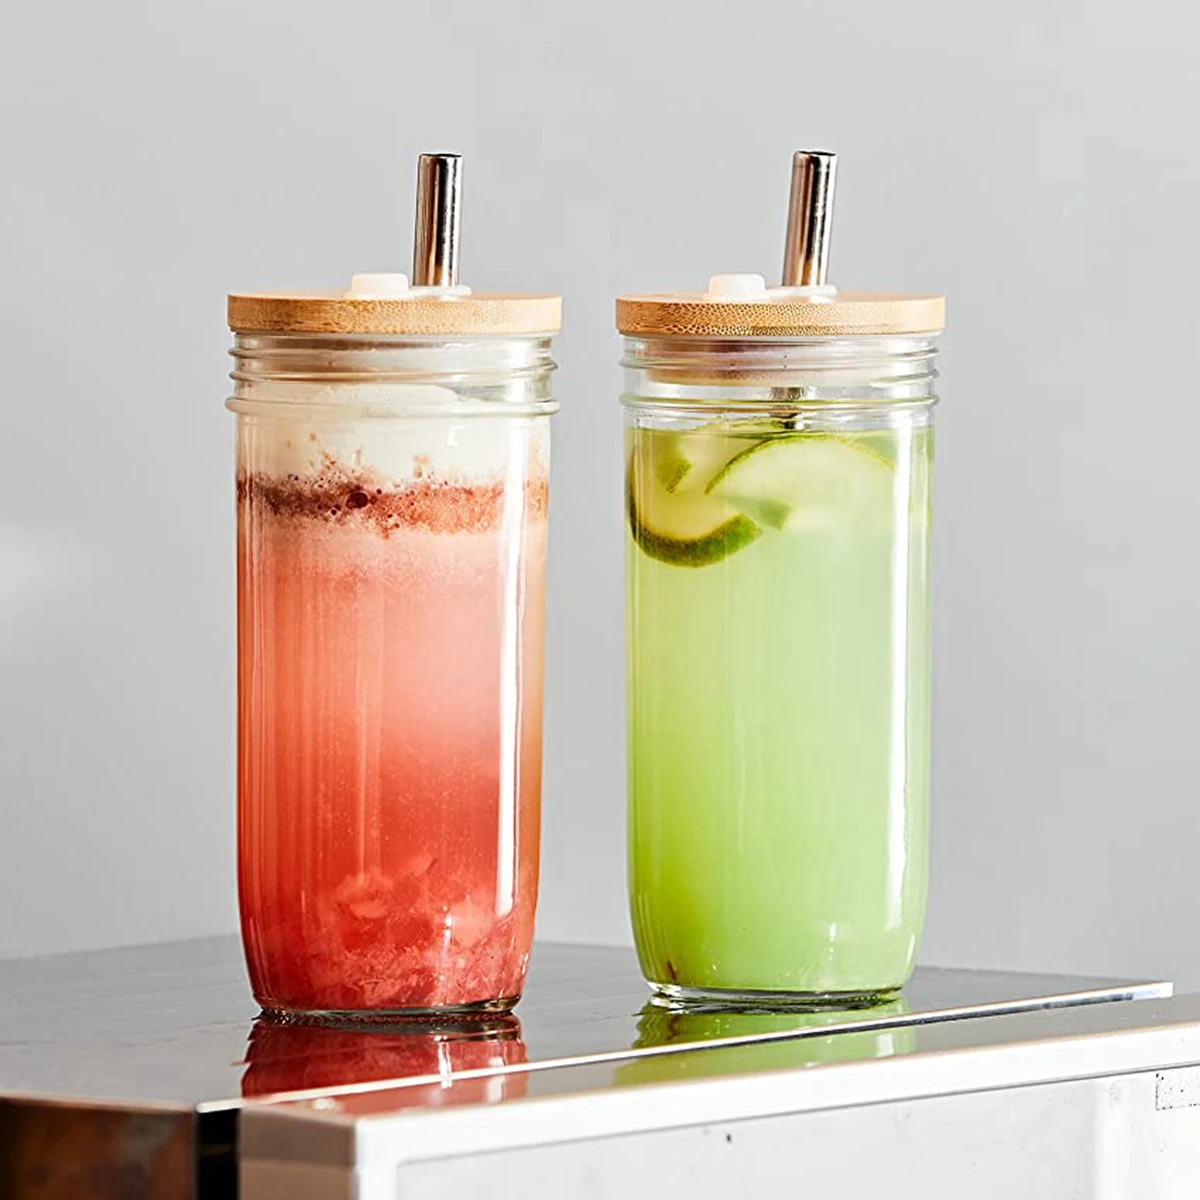 https://ae01.alicdn.com/kf/S8f4d041a38c0437ba39f41e5d40a4f7ah/24oz-Straw-Cup-with-Wooden-Lid-Reusable-Bubble-Tea-Glass-Cup-with-Straw-for-Smoothie-Boba.jpg